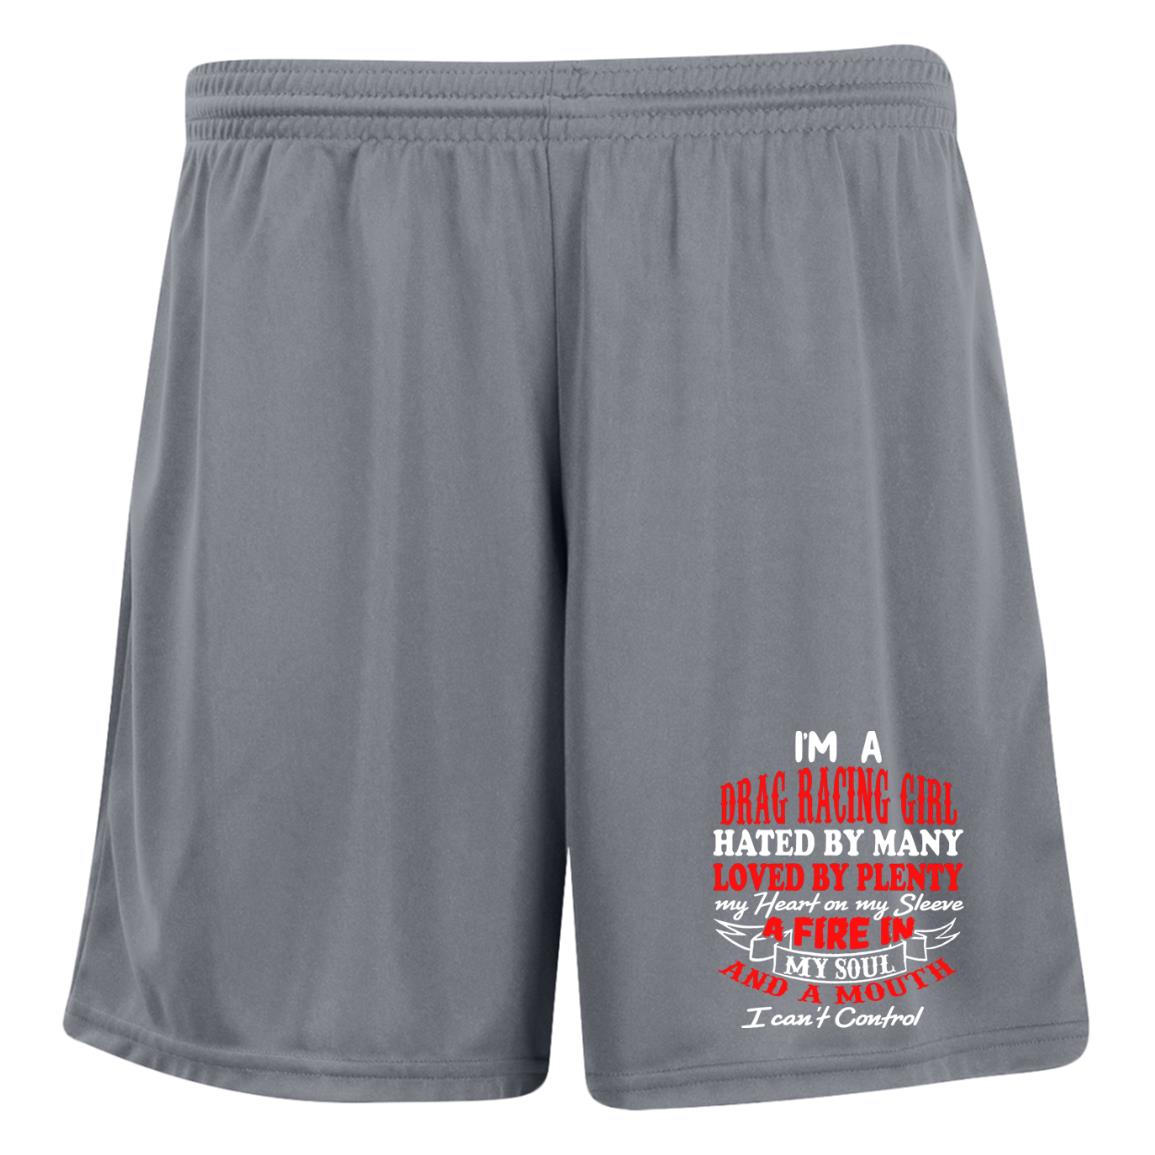 I'm A Drag Racing Girl Hated By Many Loved By Plenty Ladies' Moisture-Wicking 7 inch Inseam Training Shorts